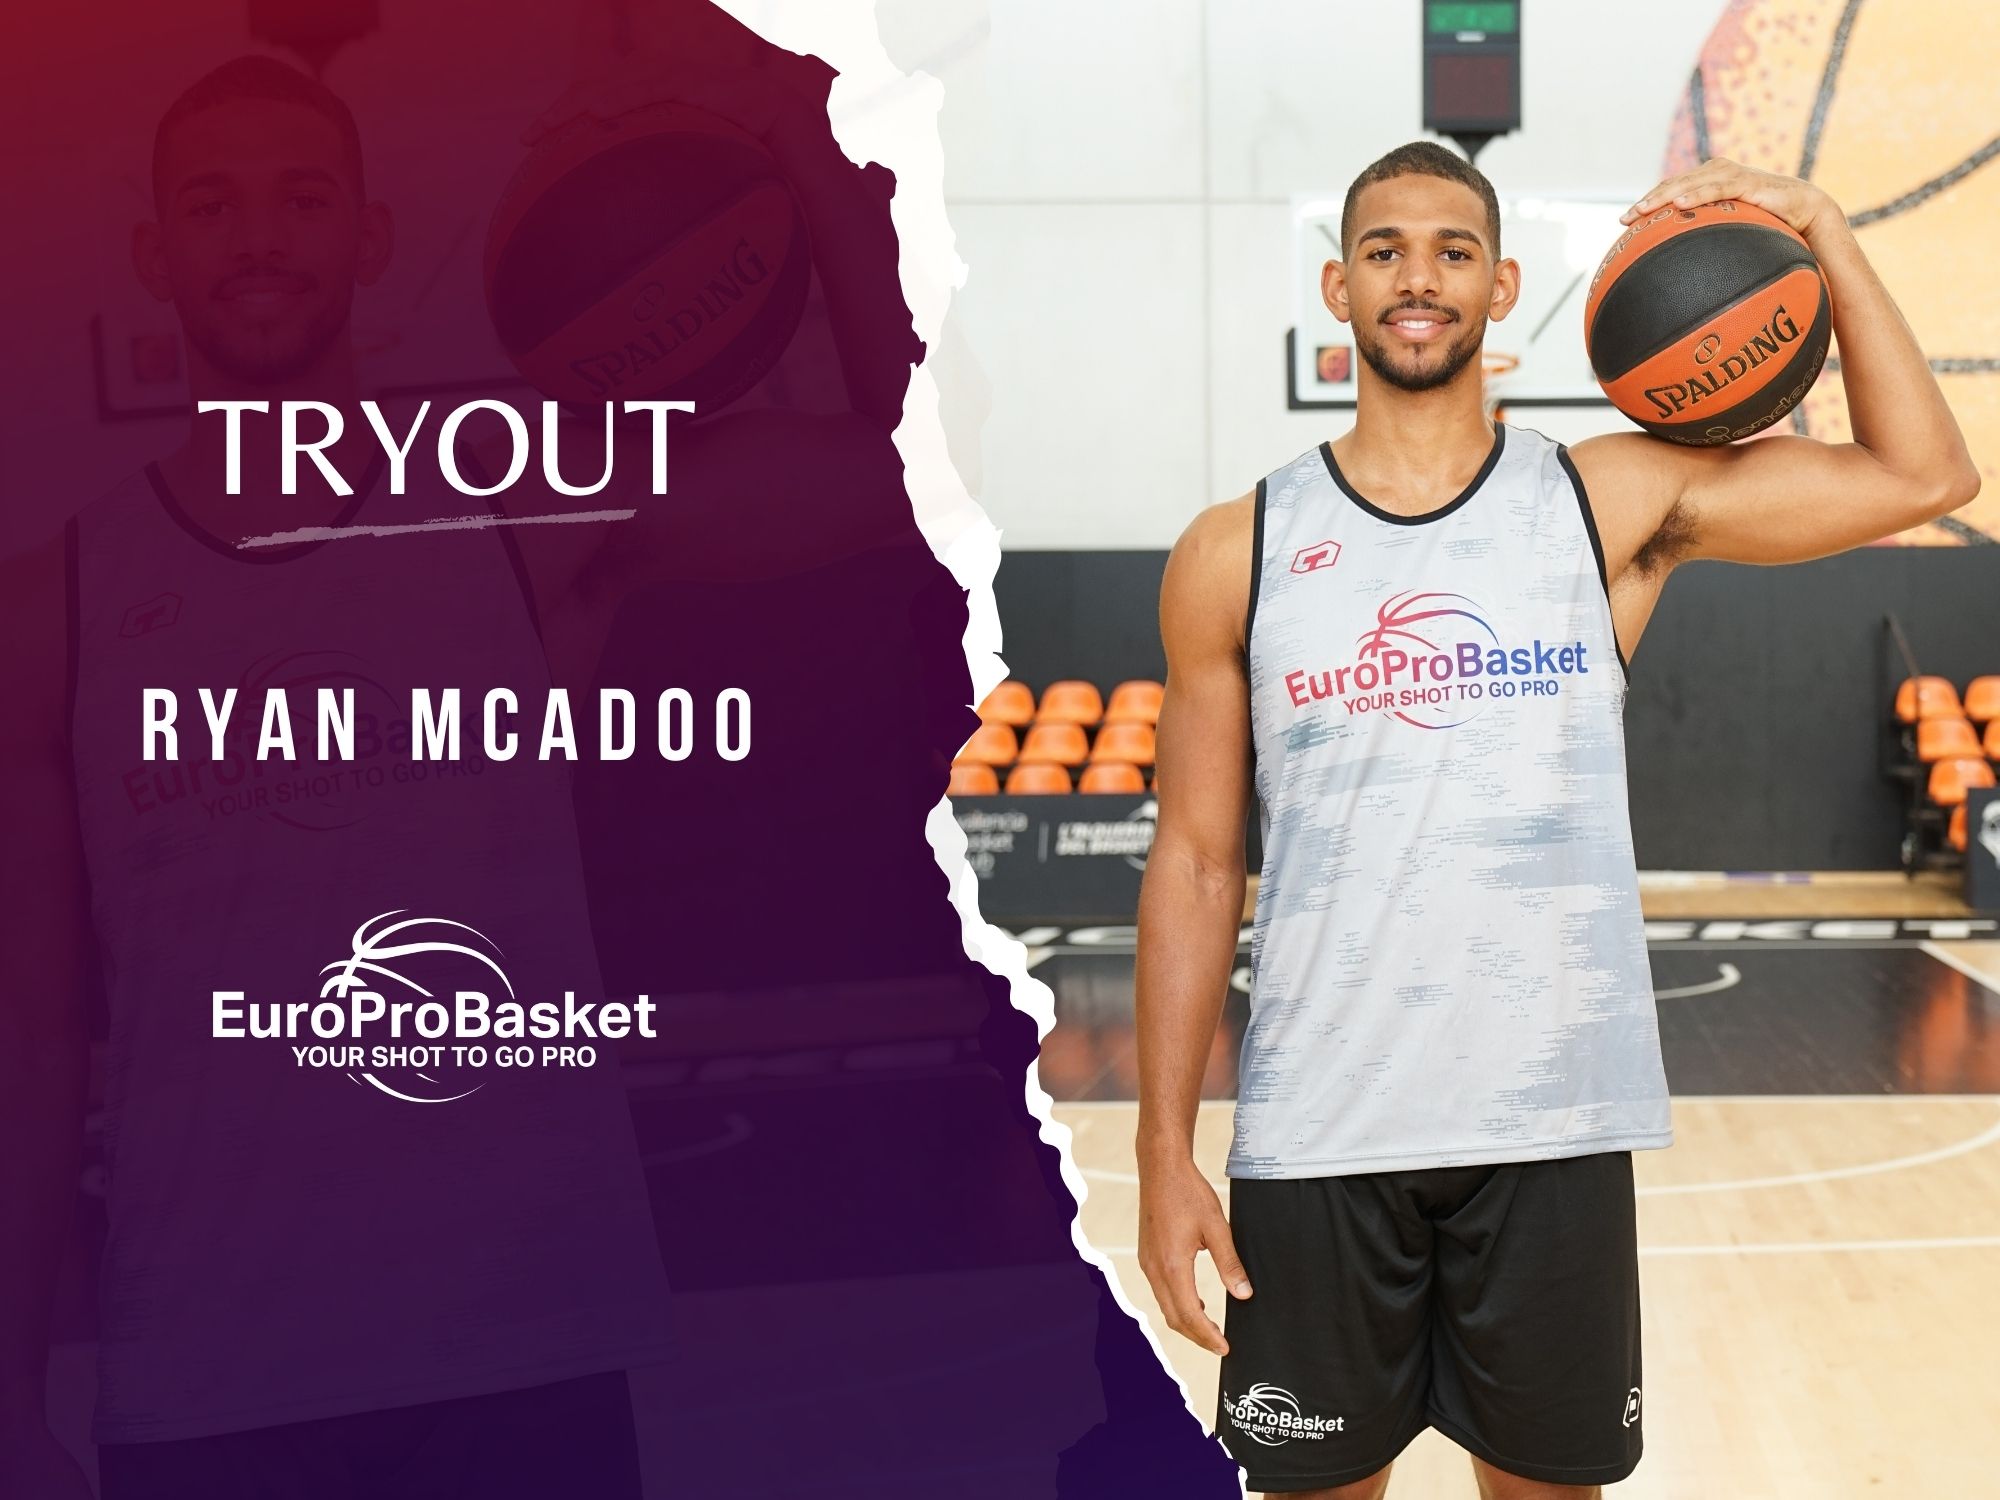 EuroProBasket Player on Tryout in Alicante, Spain